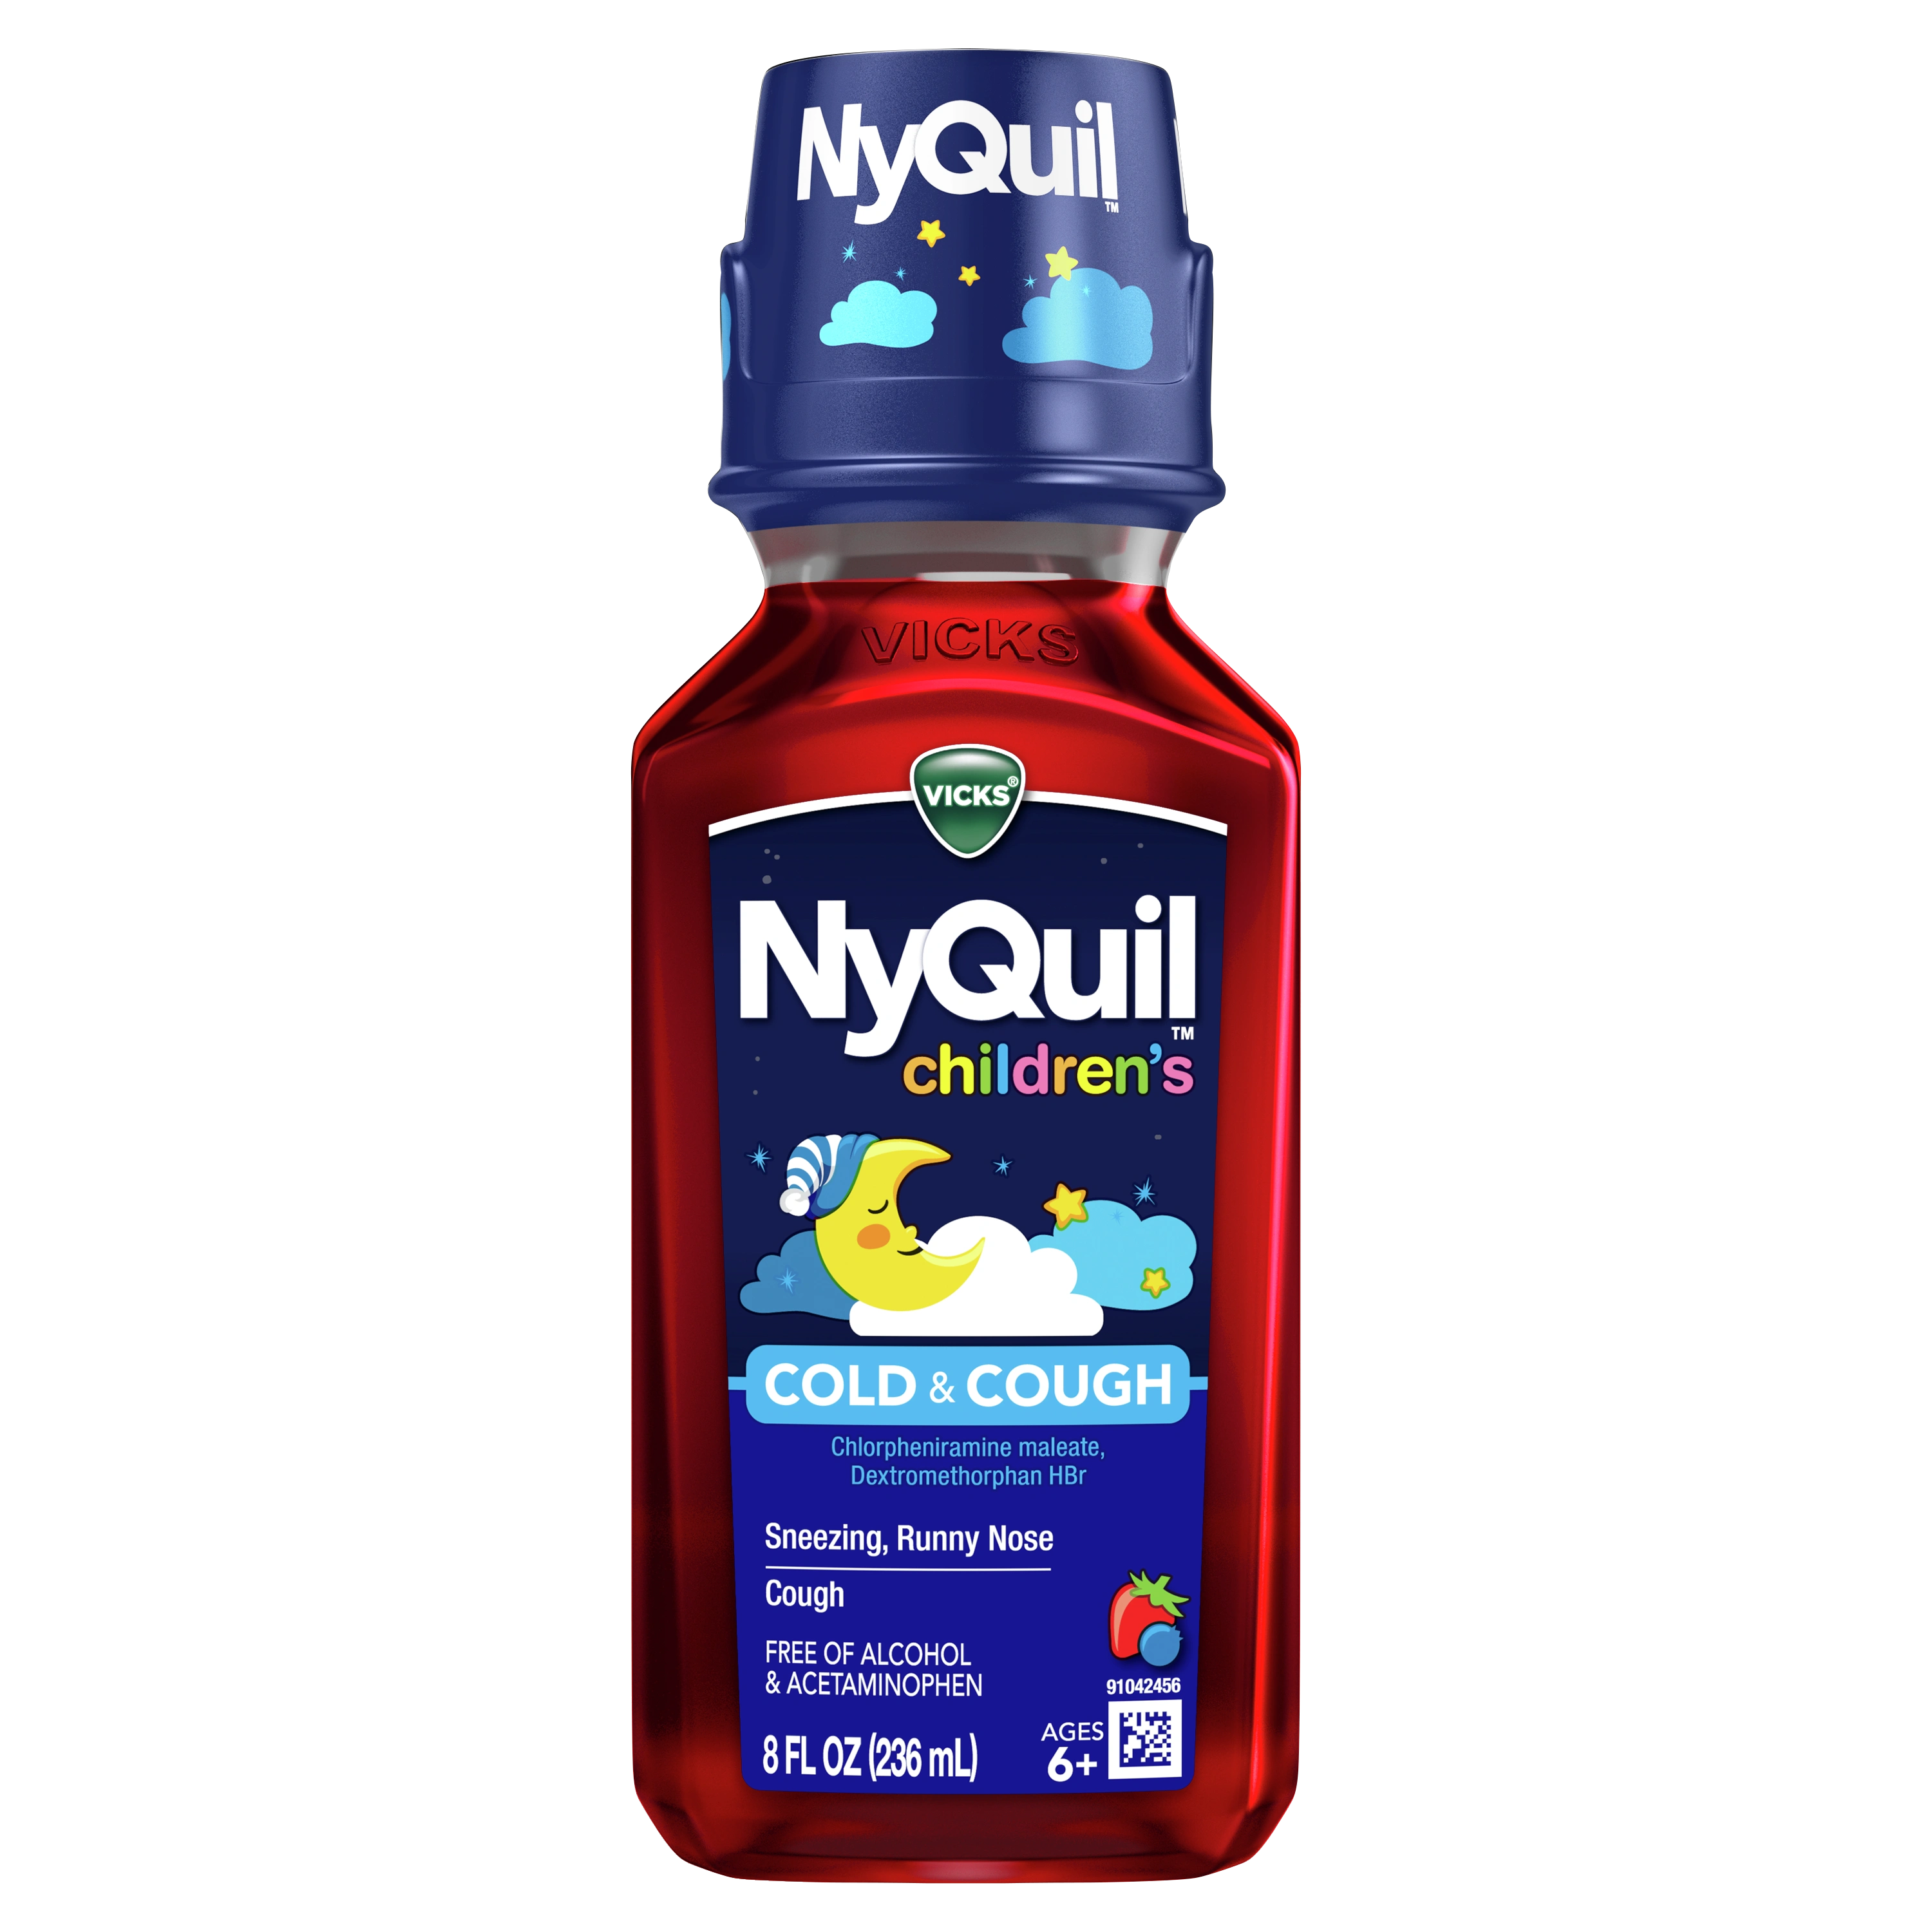 Children's NyQuil™ Cold & Cough Medicine